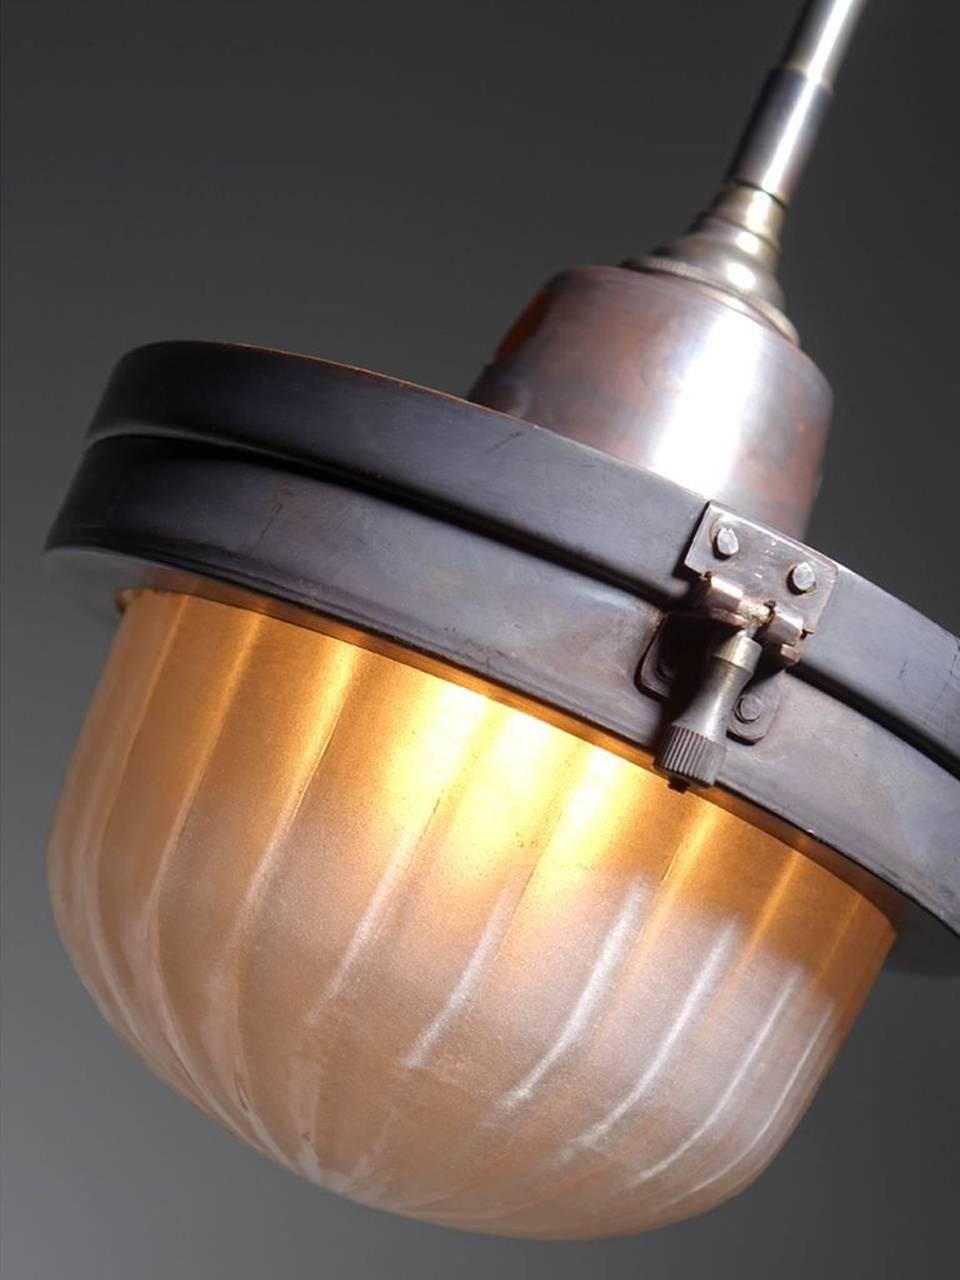 This is an interesting and very unique looking lamp. The fixture itself has a hinged copper body with locking hardware. The glass is a nice frosted and ribbed glass dome. Our design inspiration came from early railroad car ceiling flush mounts. I